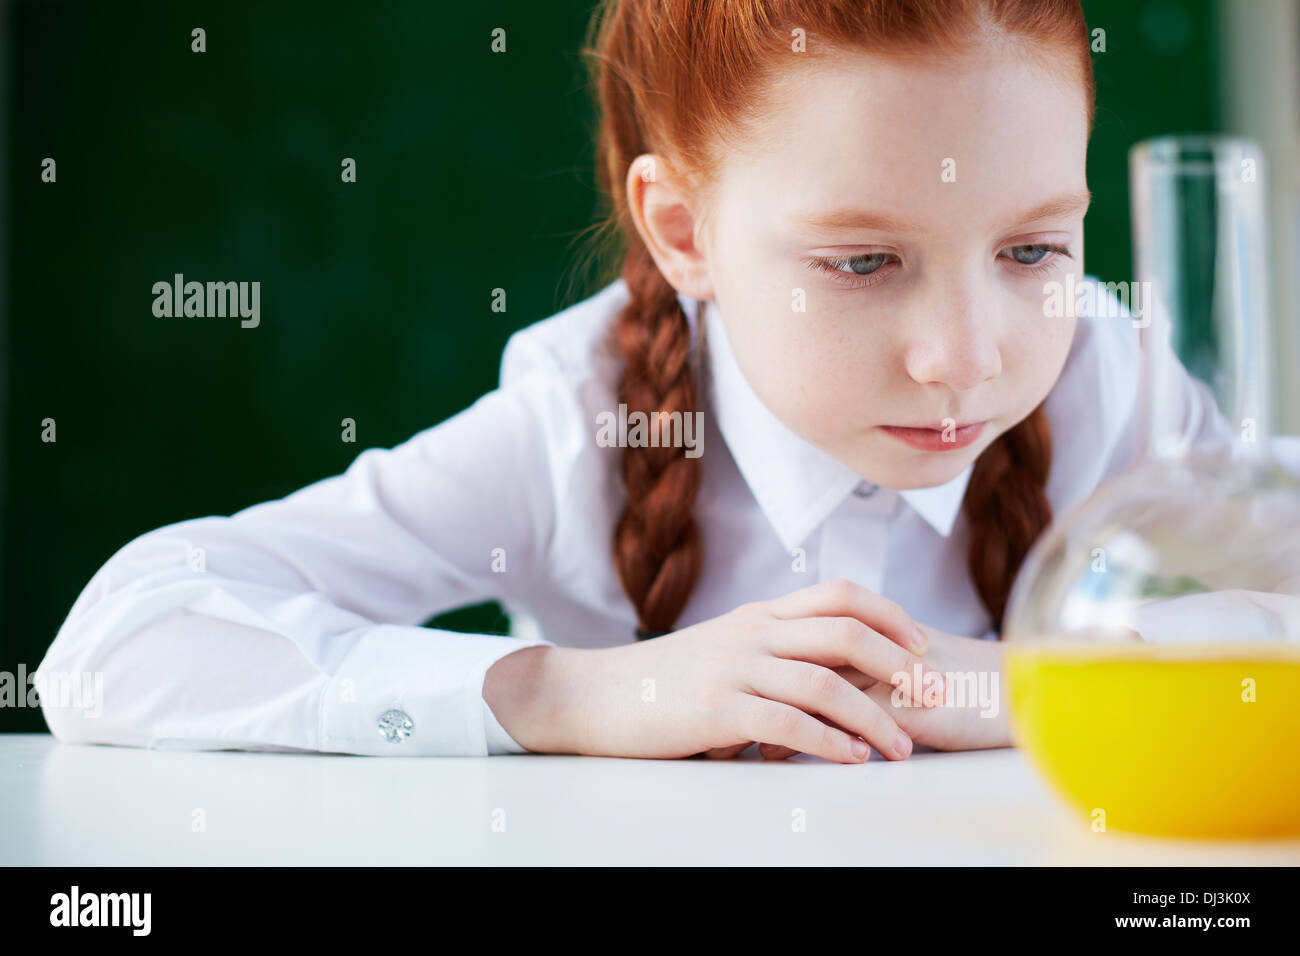 Portrait of serious schoolgirl sitting at workplace and looking at chemical liquid in tube Stock Photo